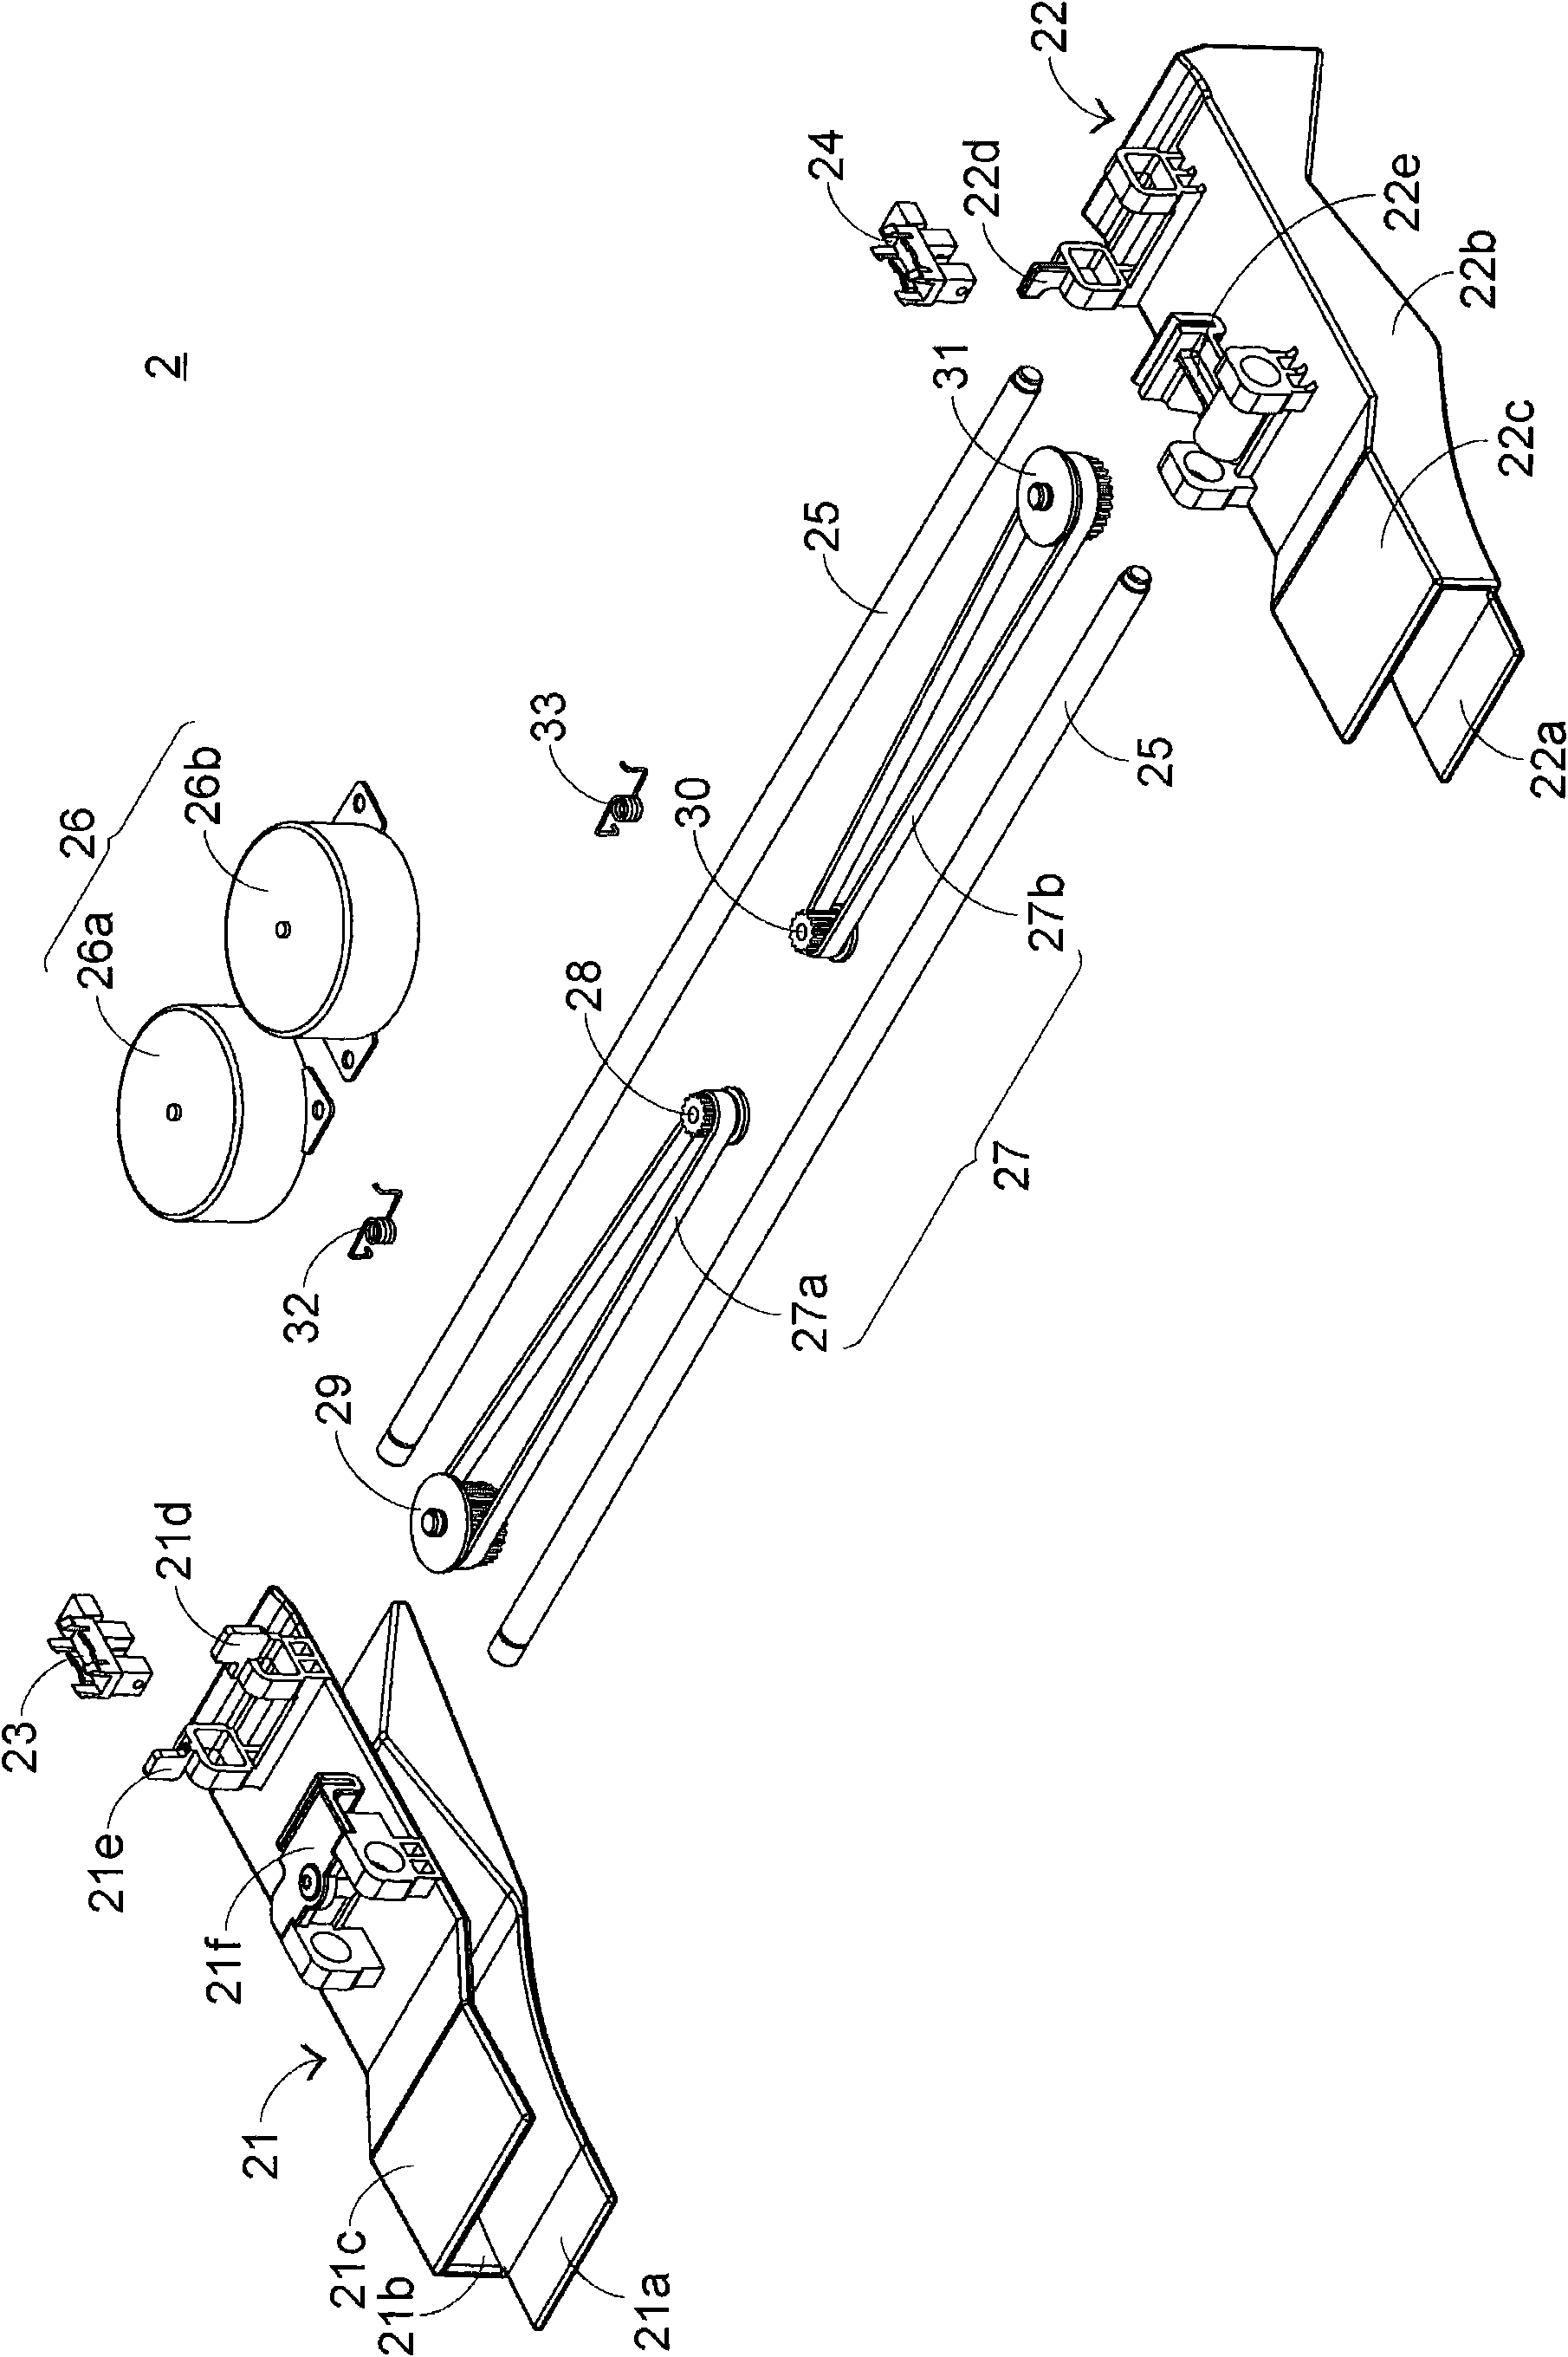 Paper arraying device